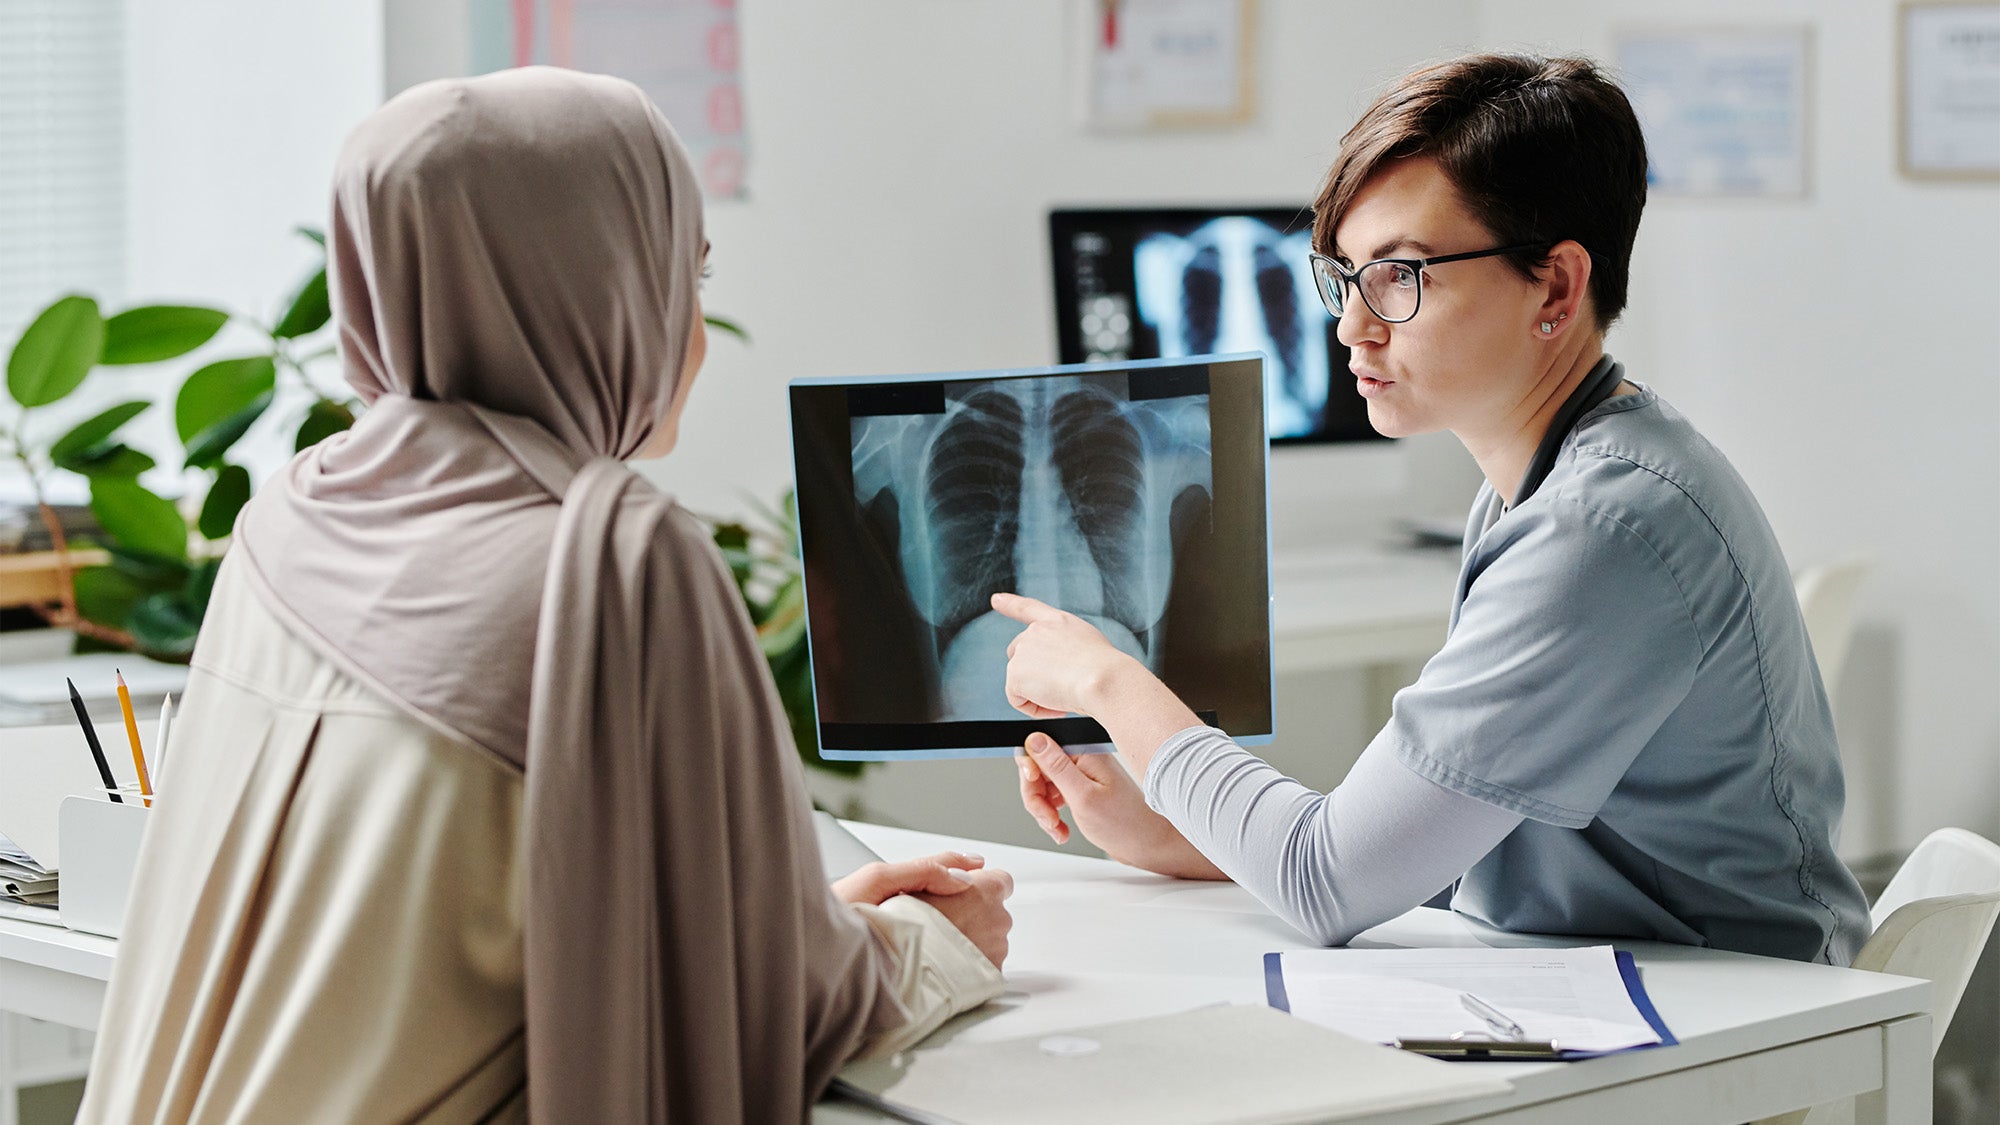 A health care provider points an xray result and speaks with a Muslim woman wearing a hijab